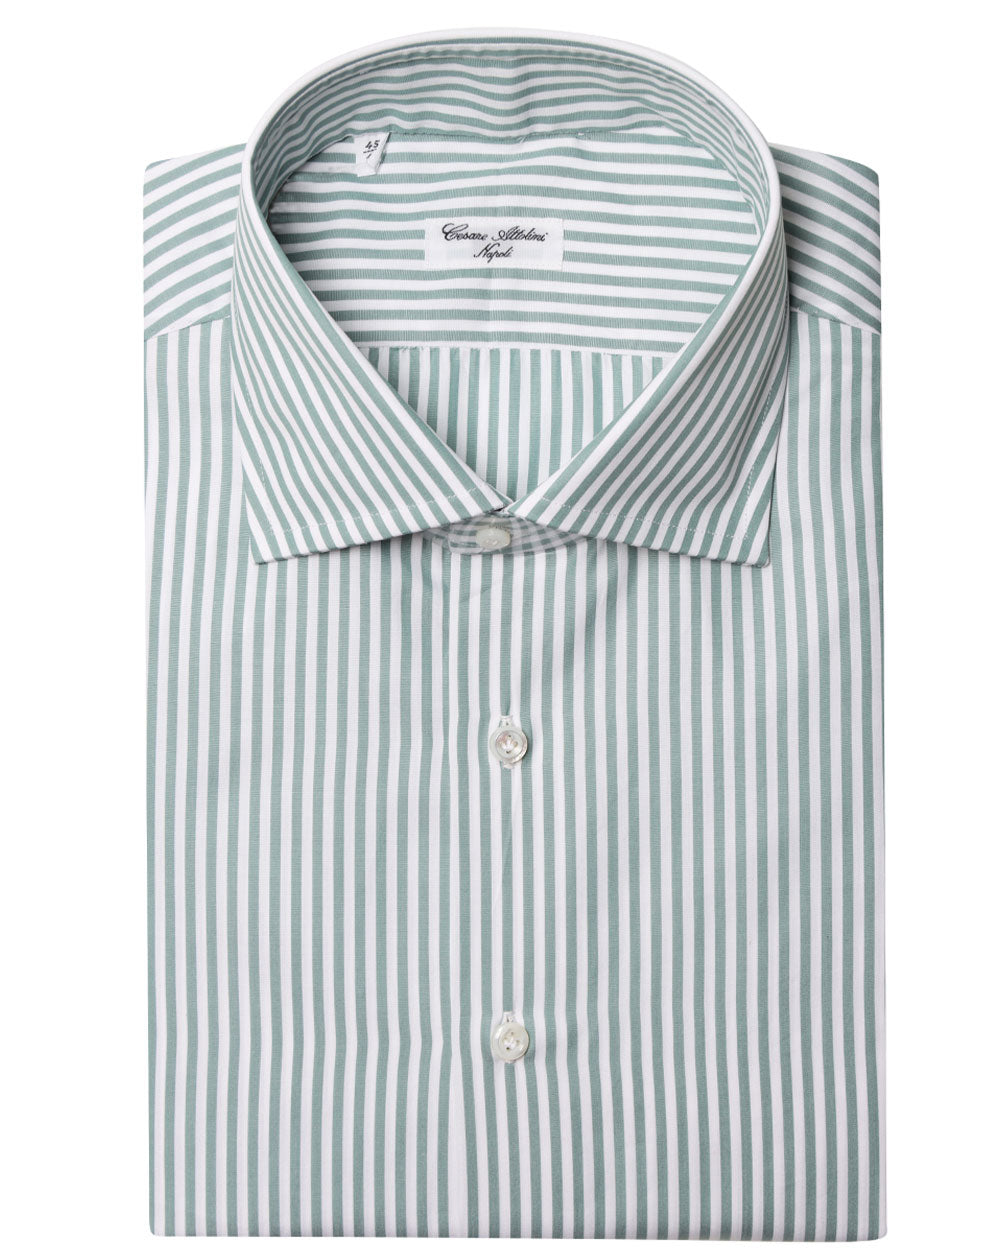 Faded Green and White Striped Cotton Dress Shirt